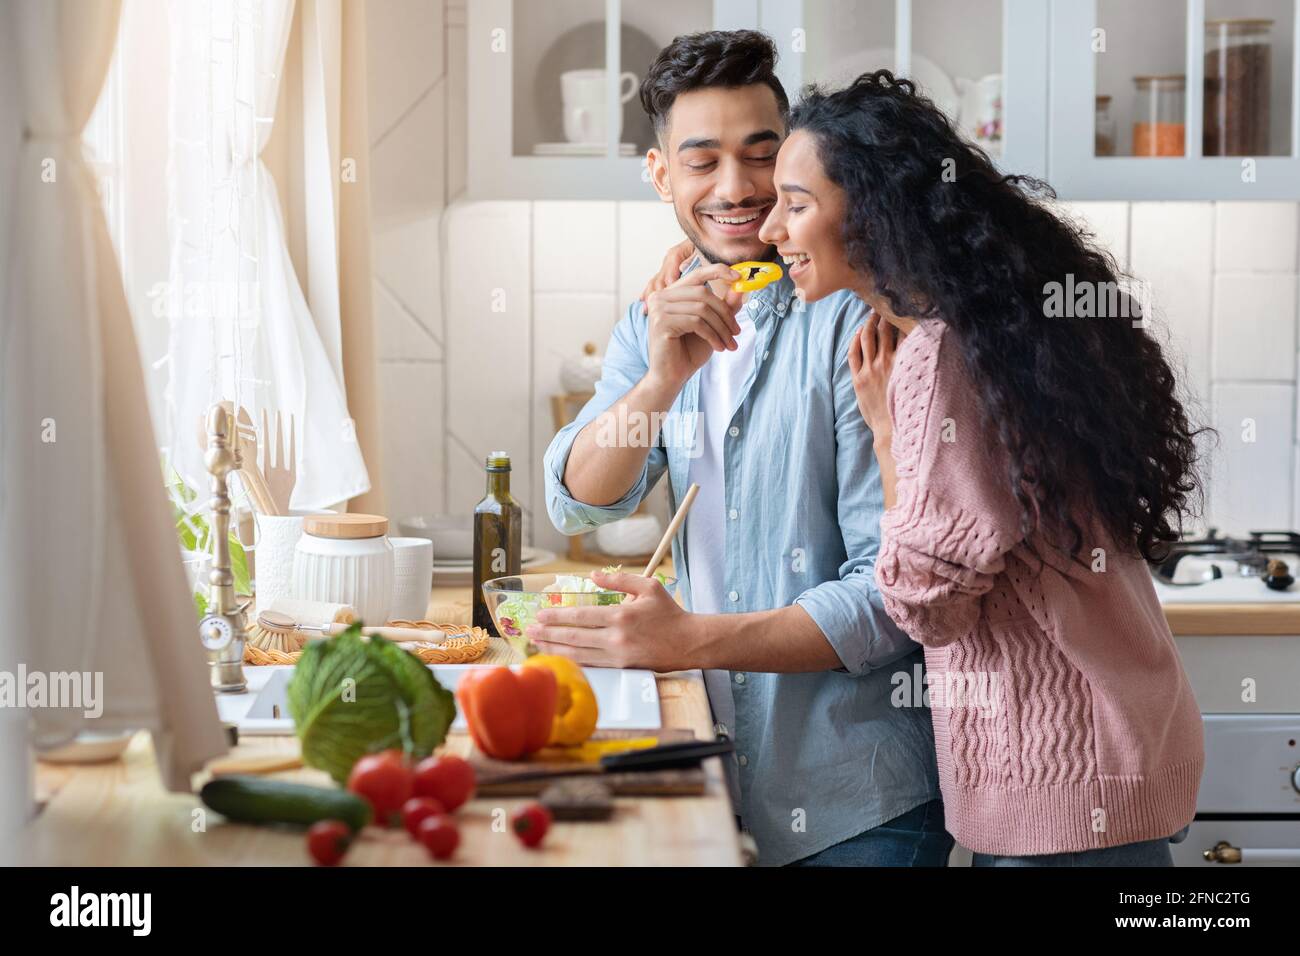 Young Arab Woman Tasting Food While Cooking With Husband In Kitchen Together Stock Photo